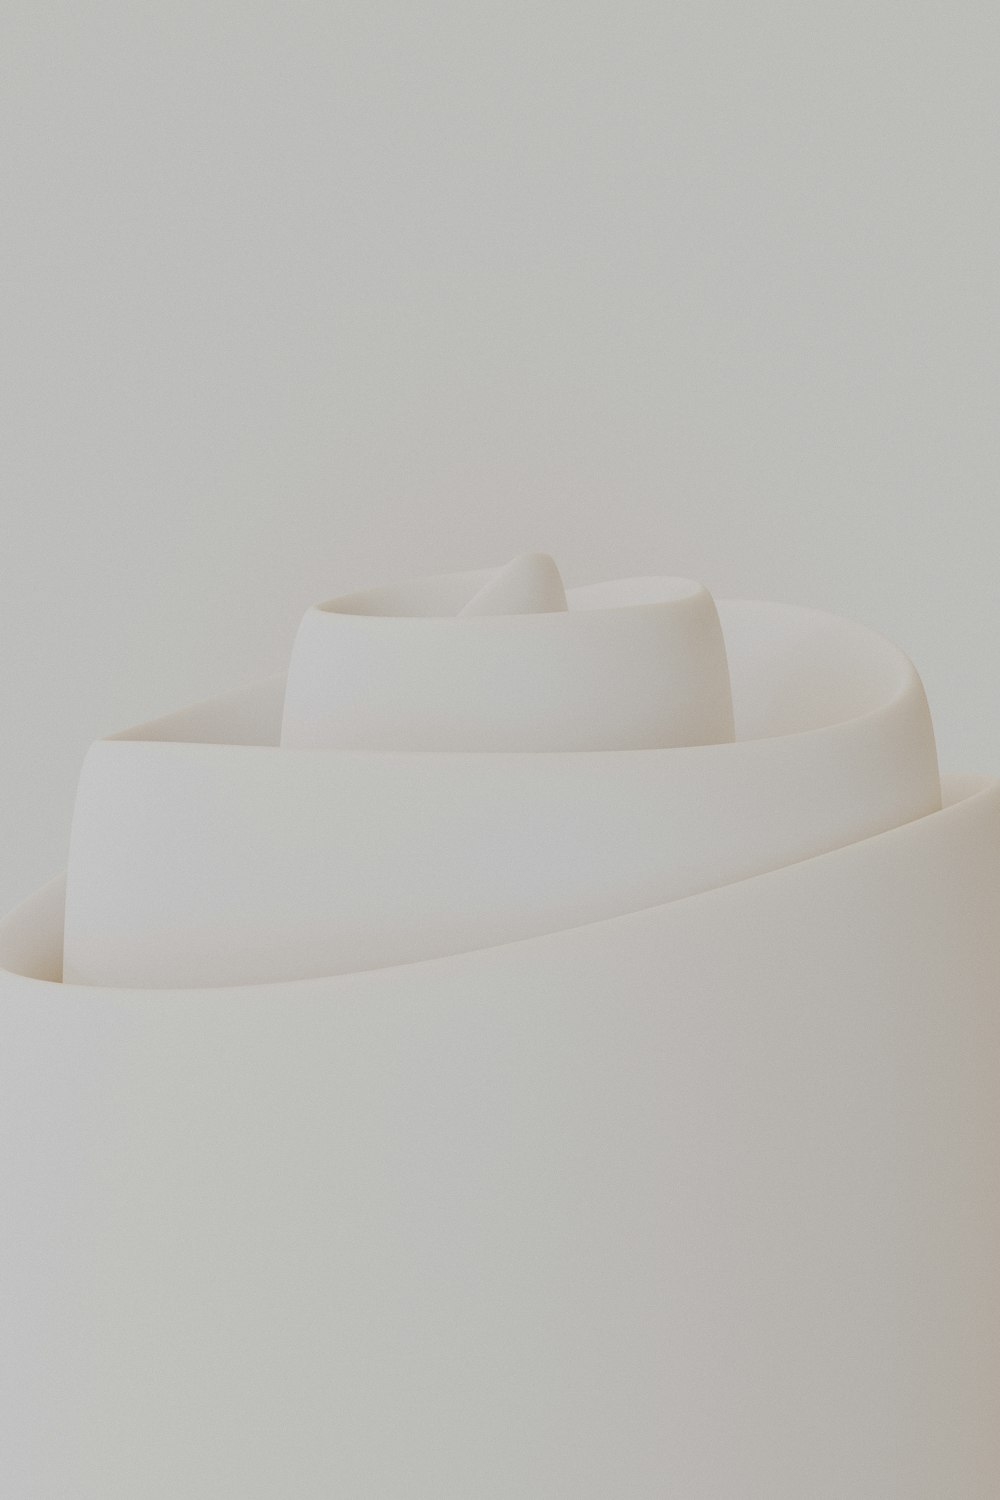 a close up of a white object with a white background